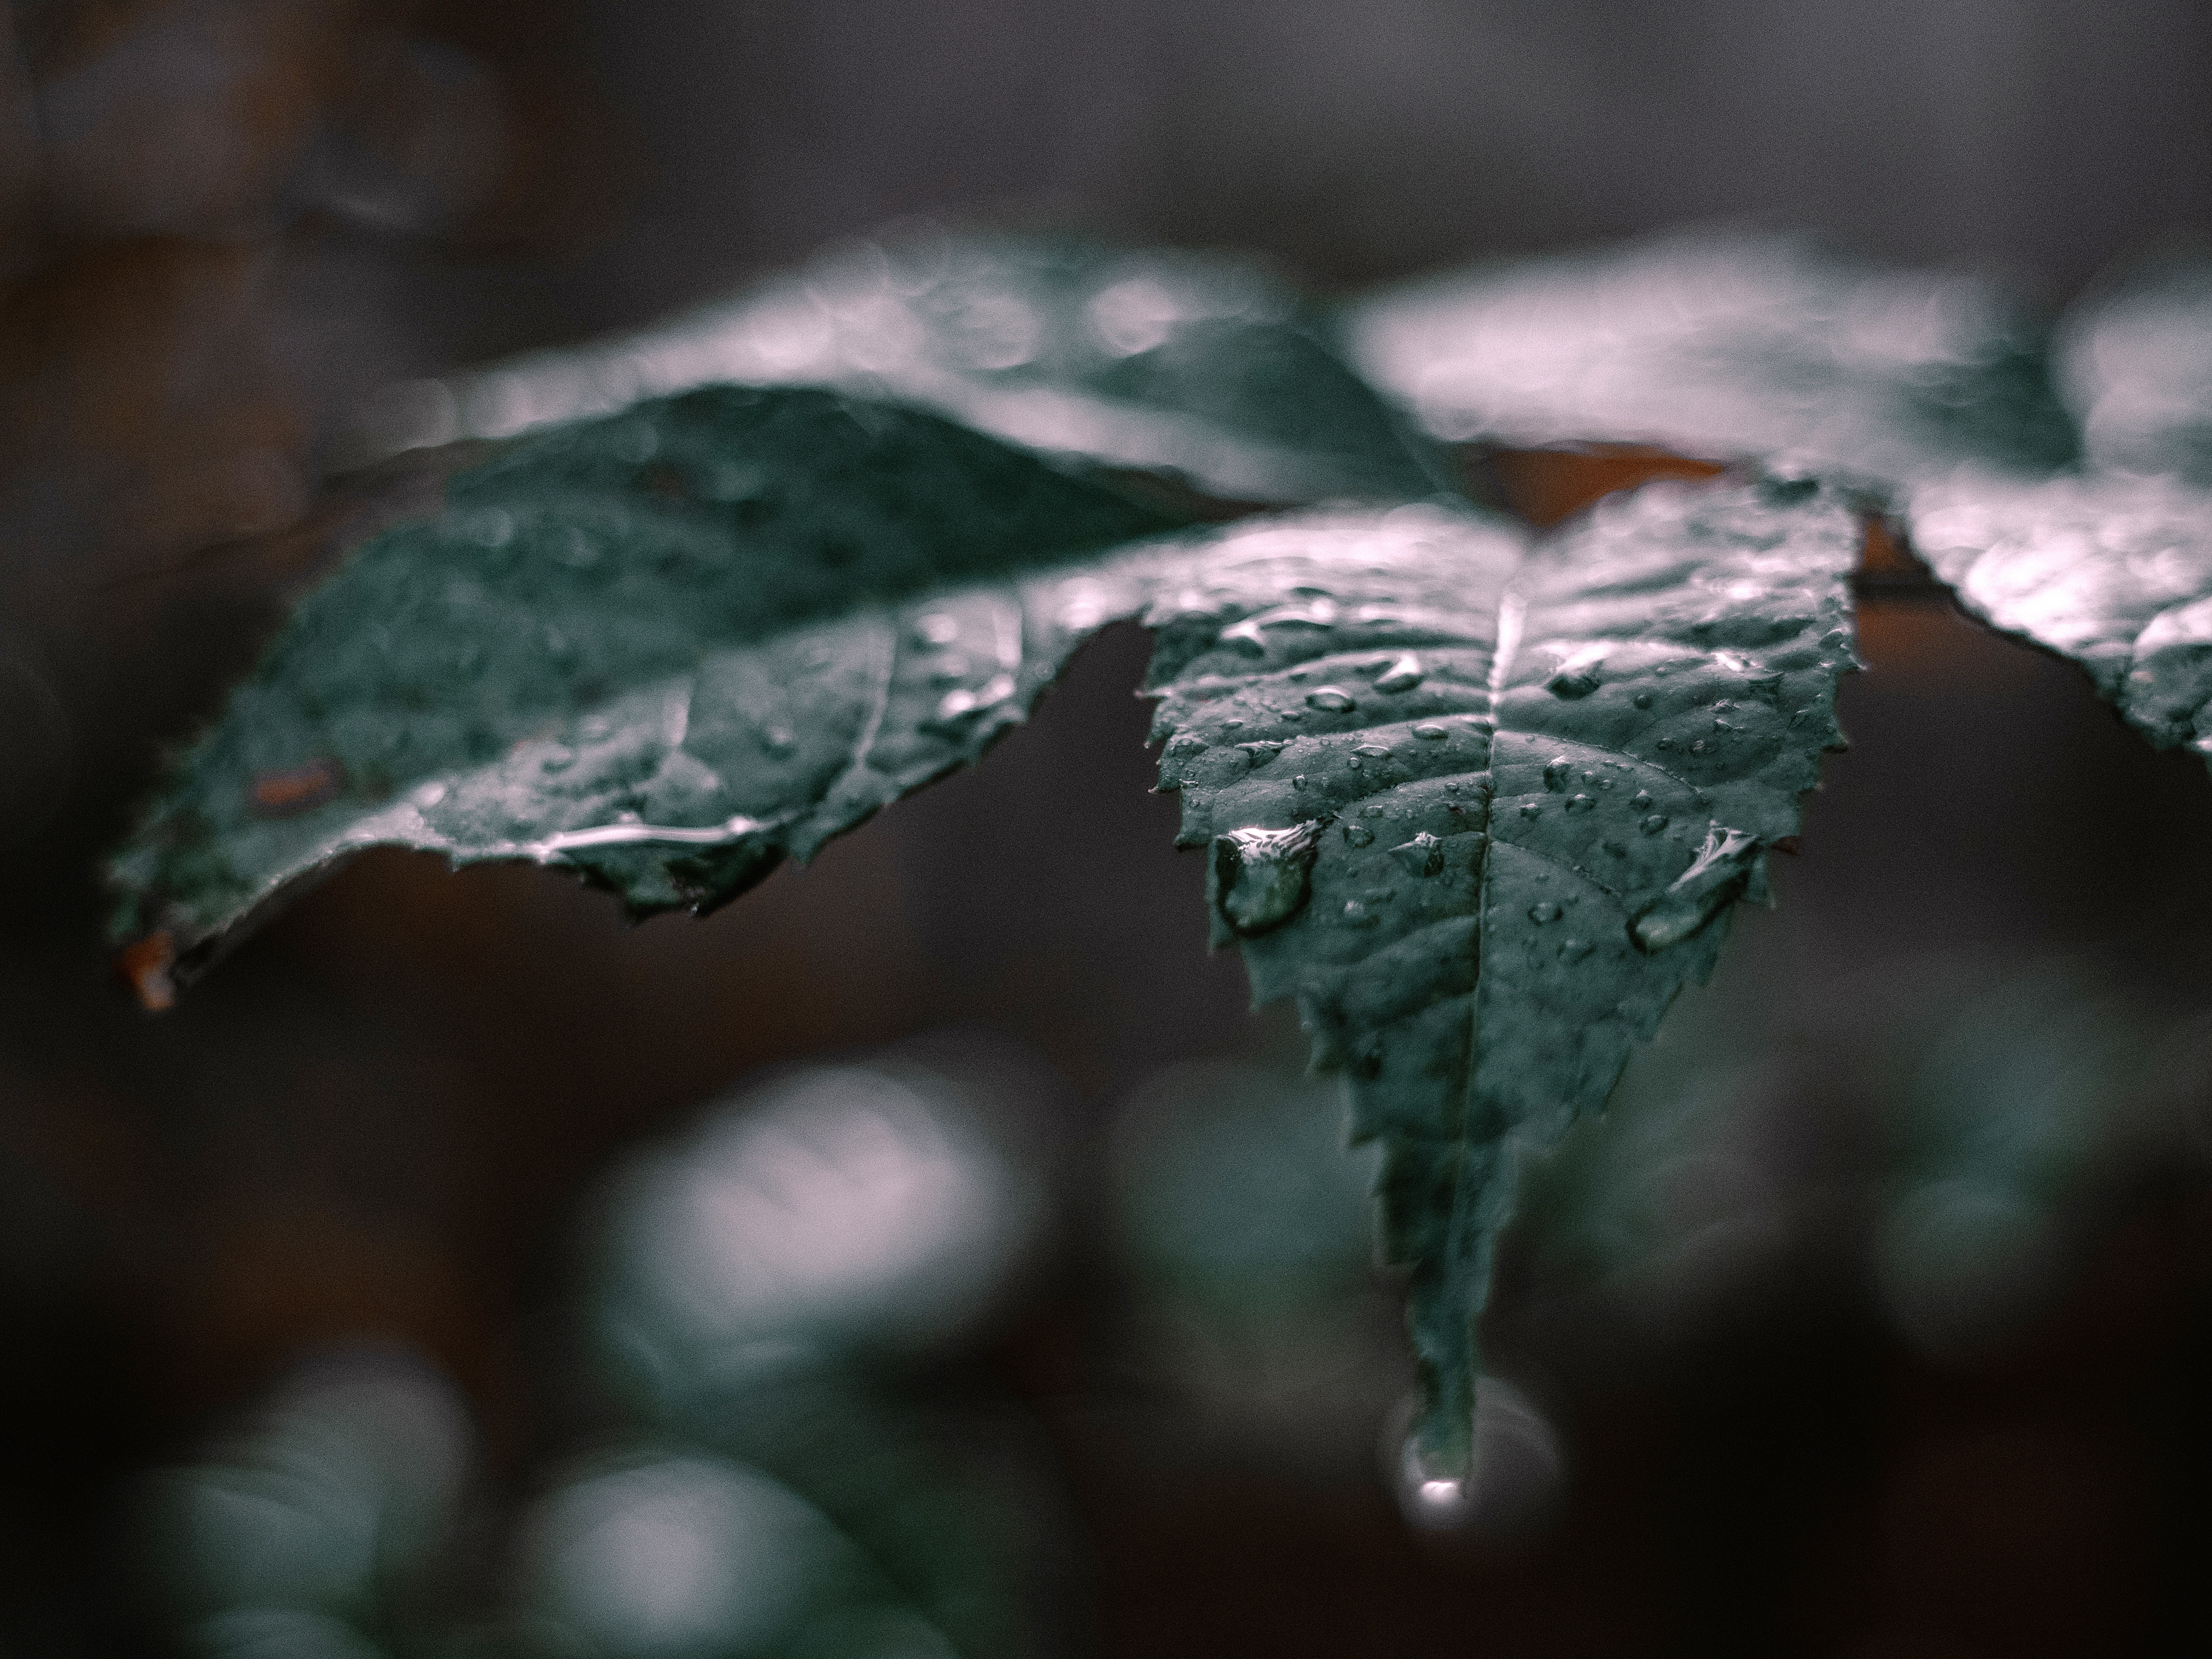 Leafs With RainDrops